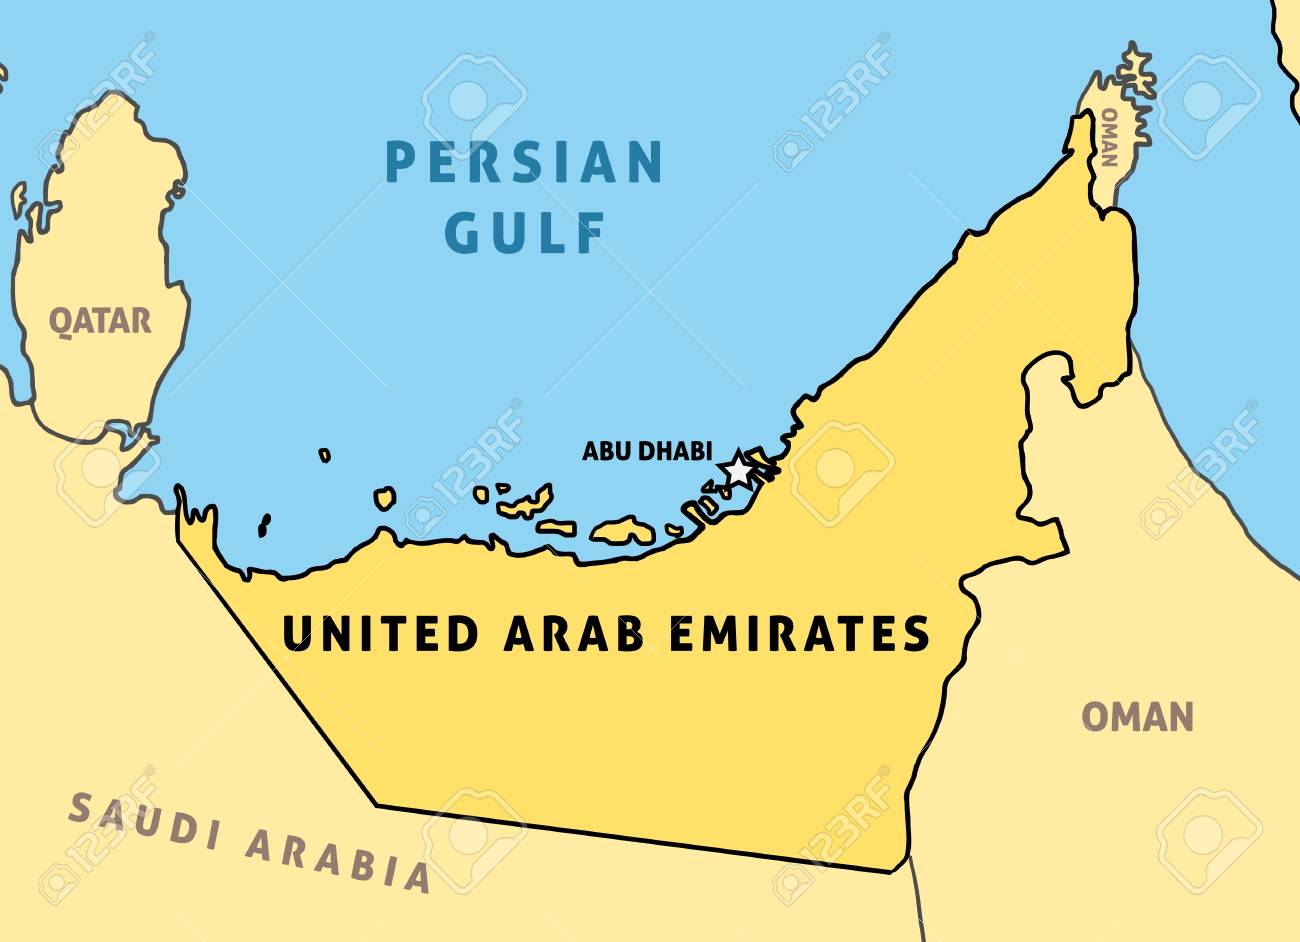 United Arab Emirates (UAE) map. Outline vector country map.